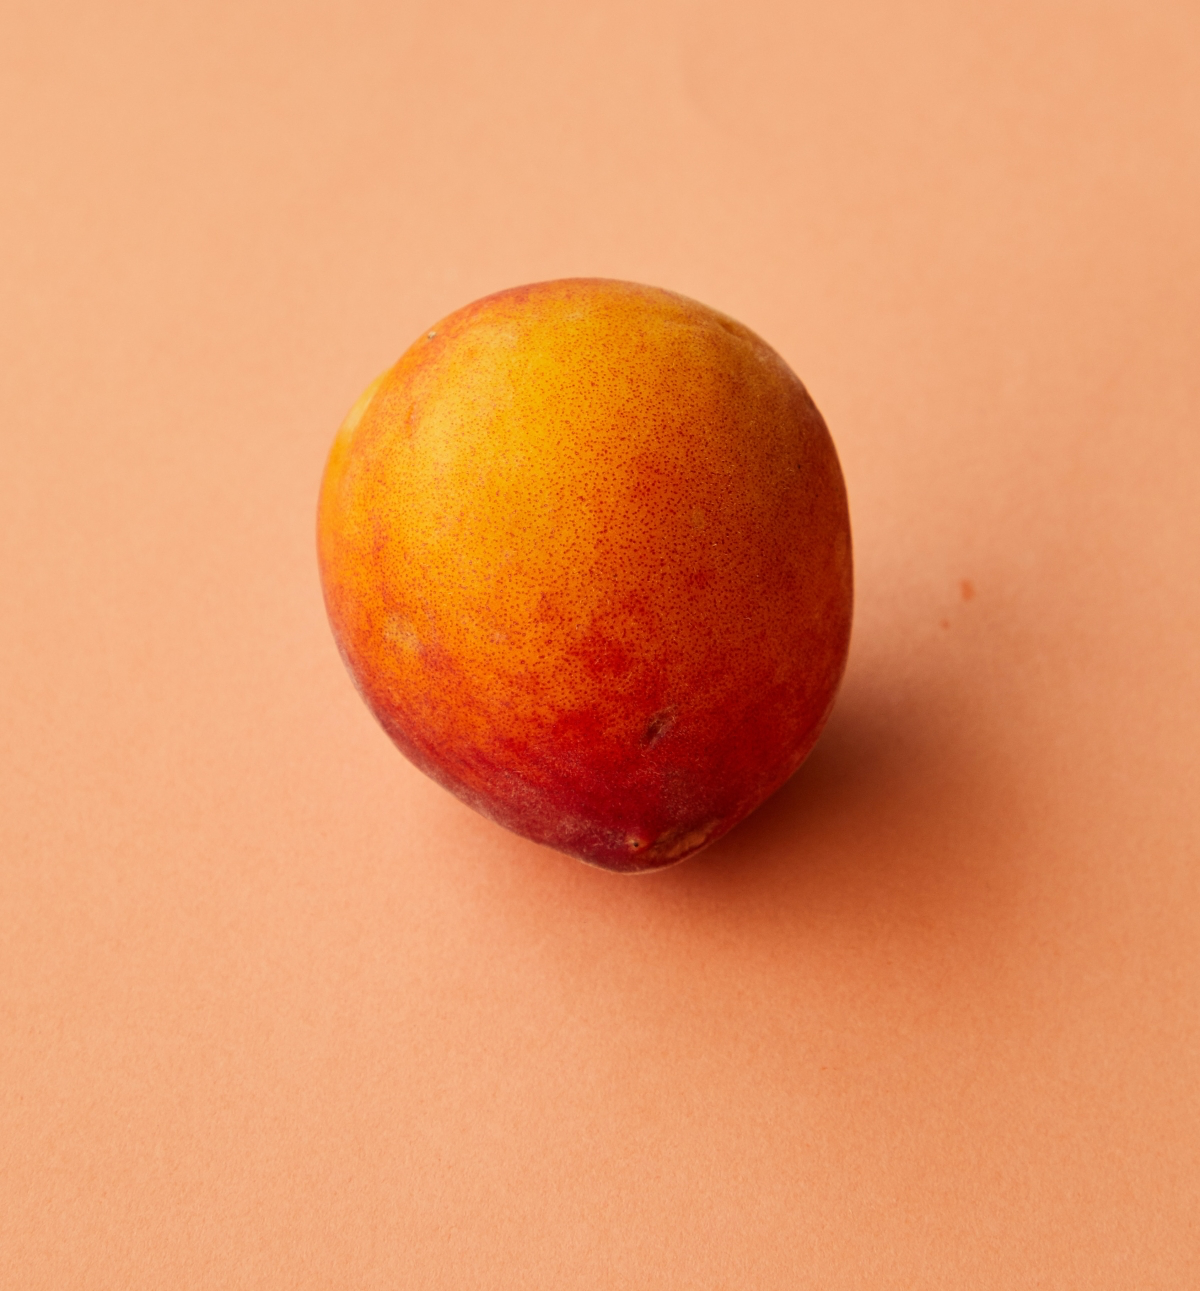 what is the difference between an apricot and a nectarine